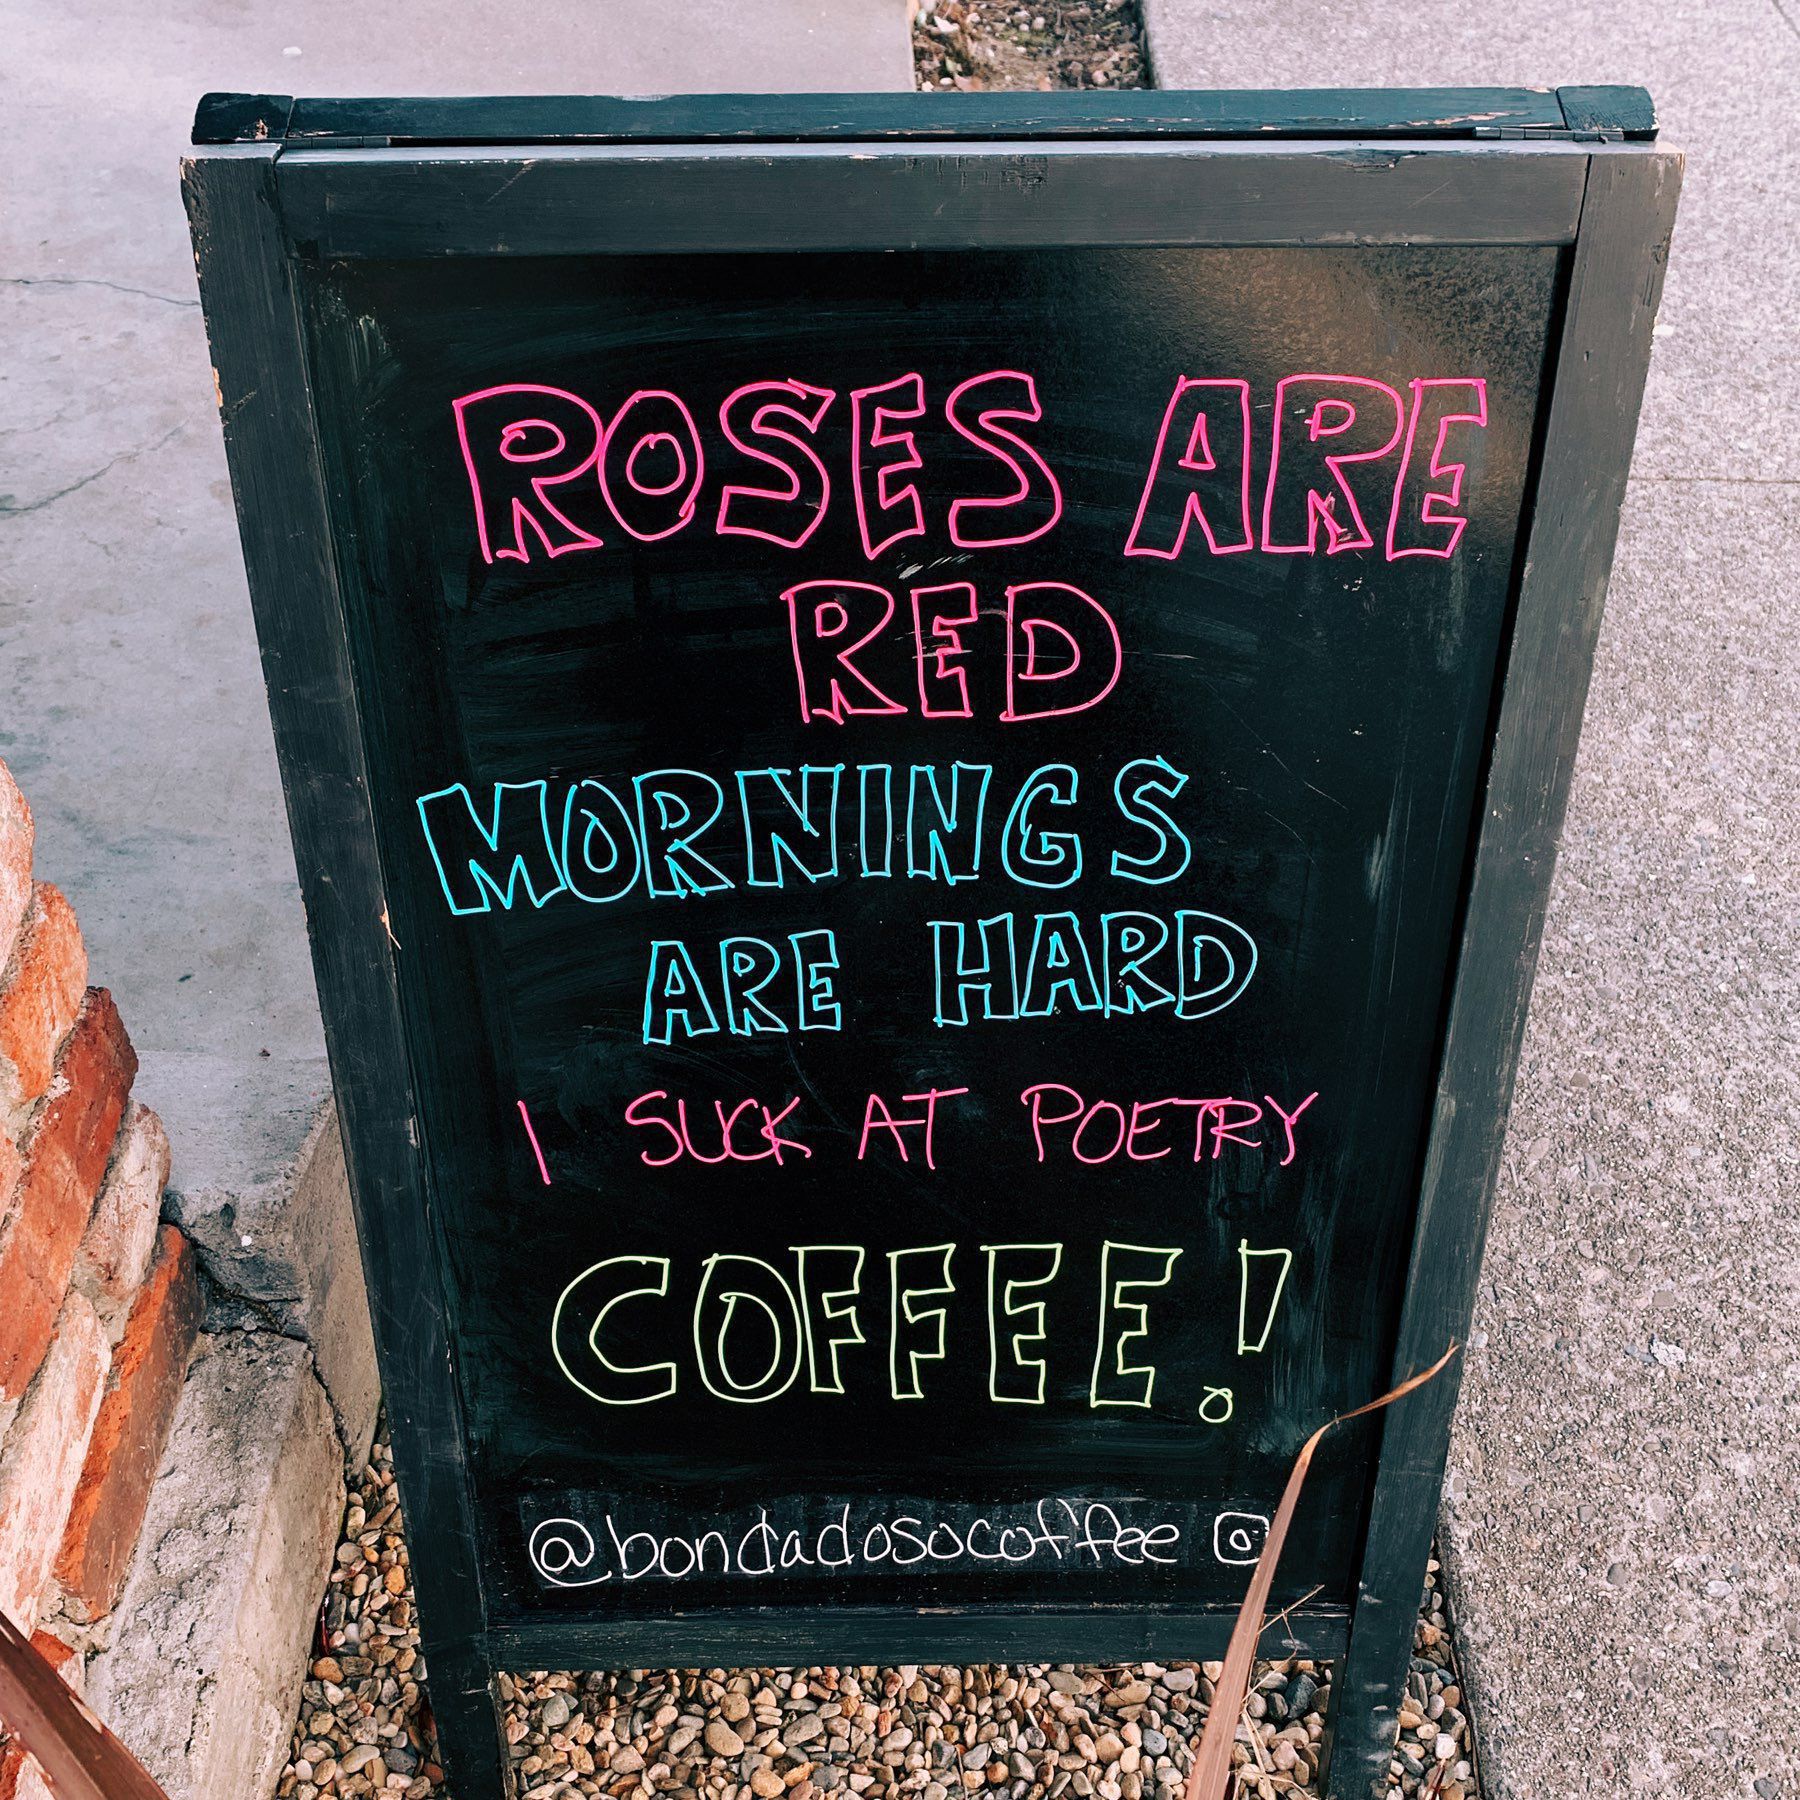 "roses are red / mornings are hard / i suck at poetry / COFFEE!"